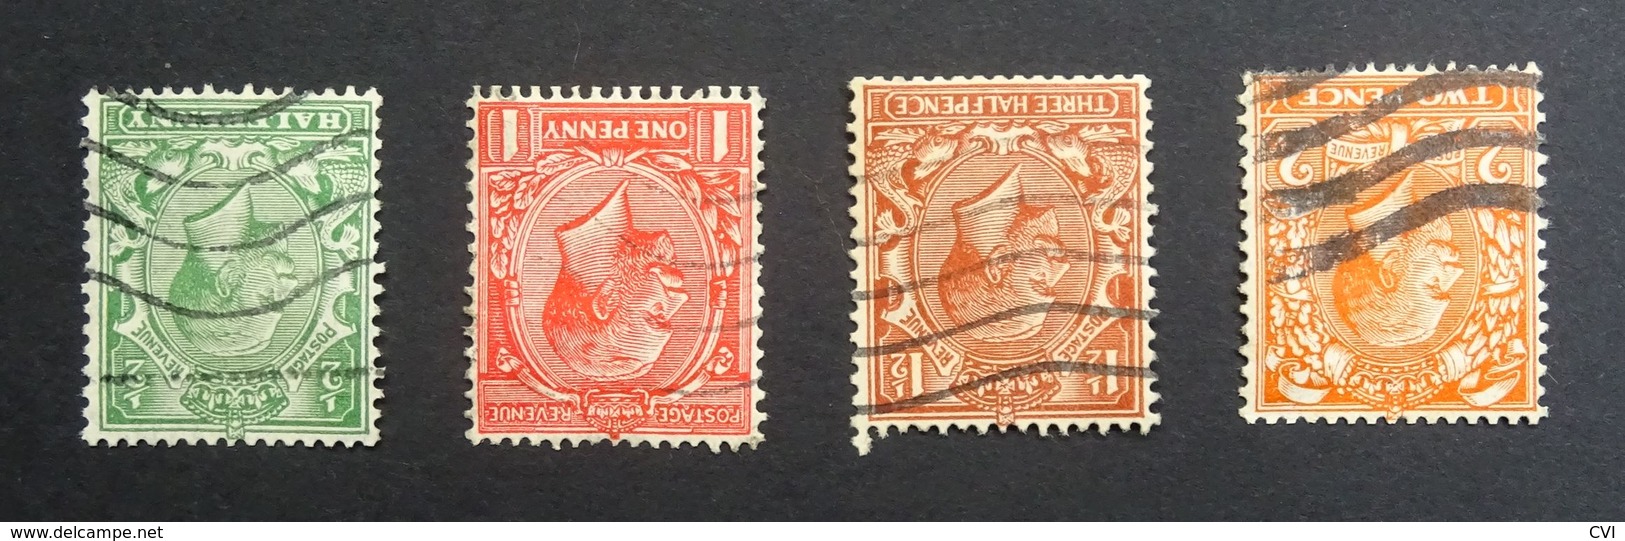 GB KGV 1912-24  SG351,360,362,368/Sc.#159,160,161,162  1/2d To 2d, Wmk 100 Royal Simple Cypher INVERTED, Used (4 Stamps) - Oblitérés